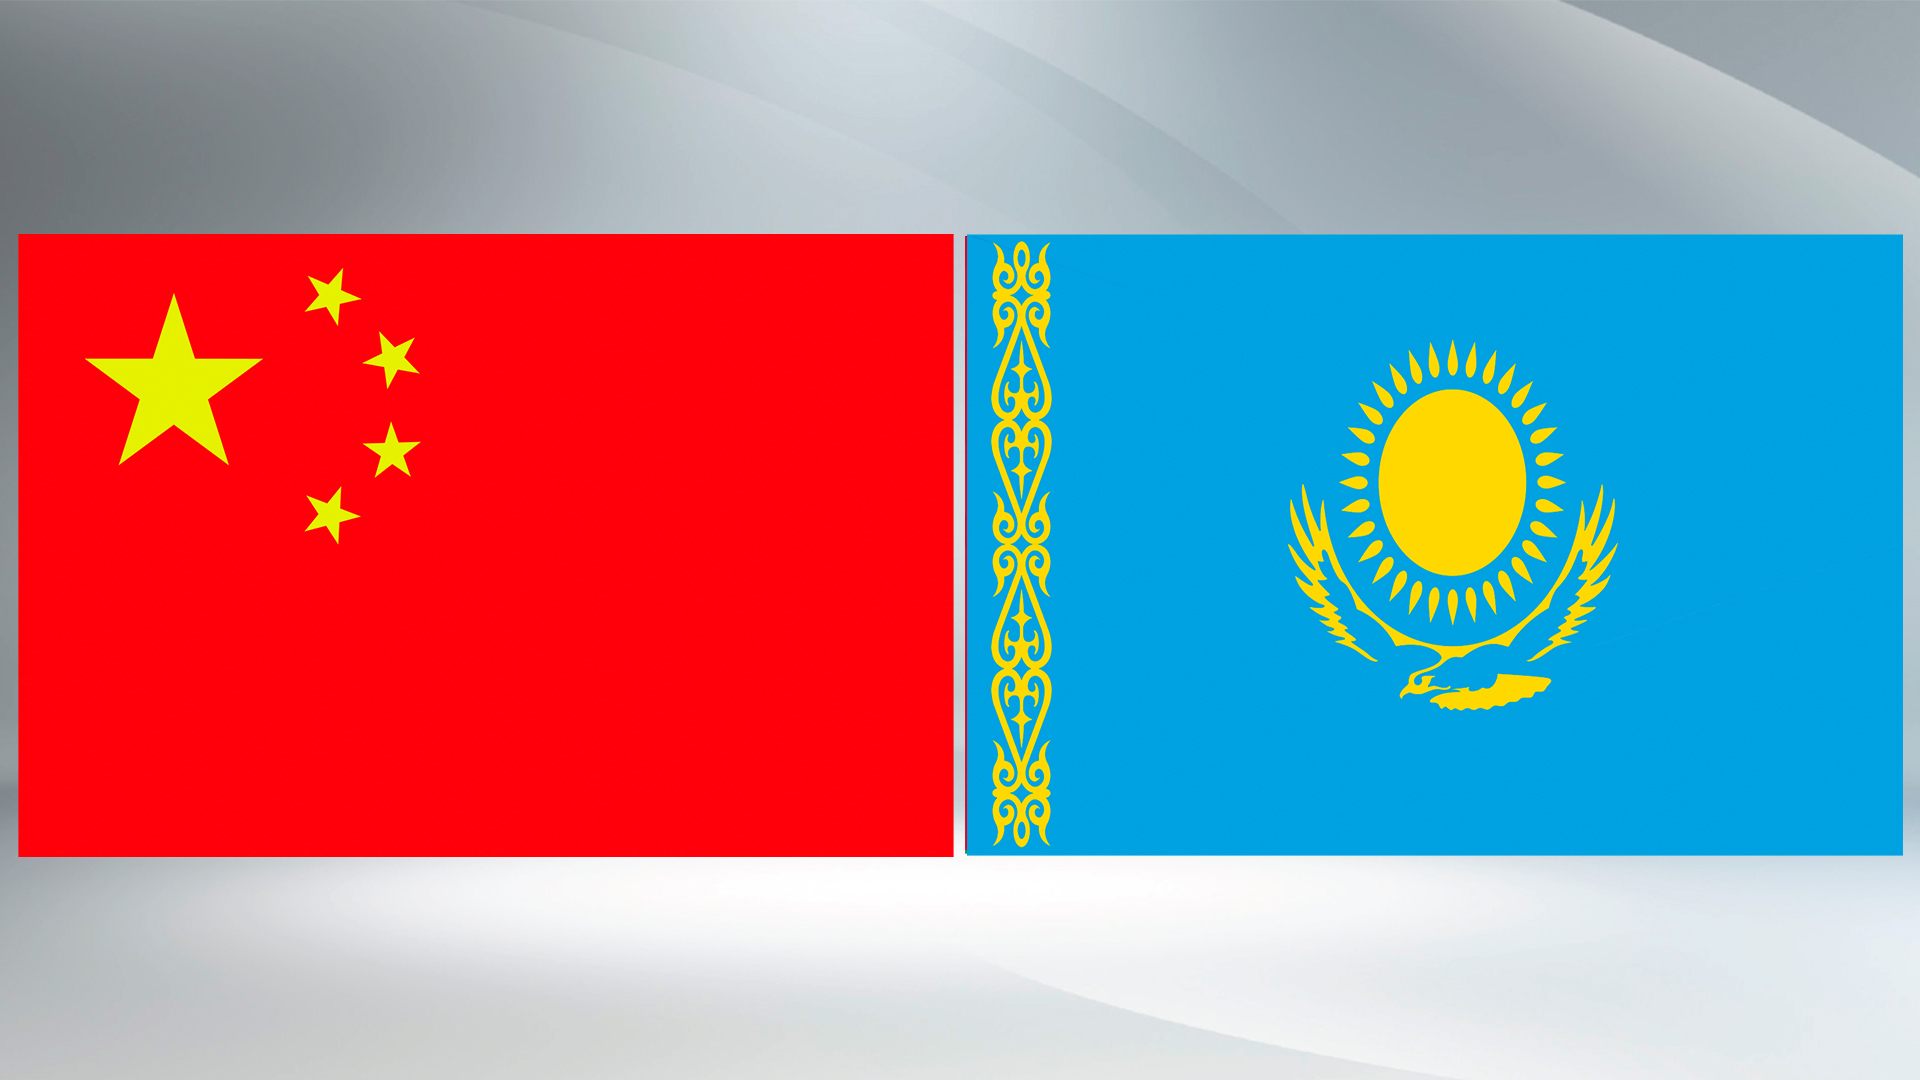 Xi exchanges congratulations with Kazakh leaders on 30th anniversary of diplomatic ties